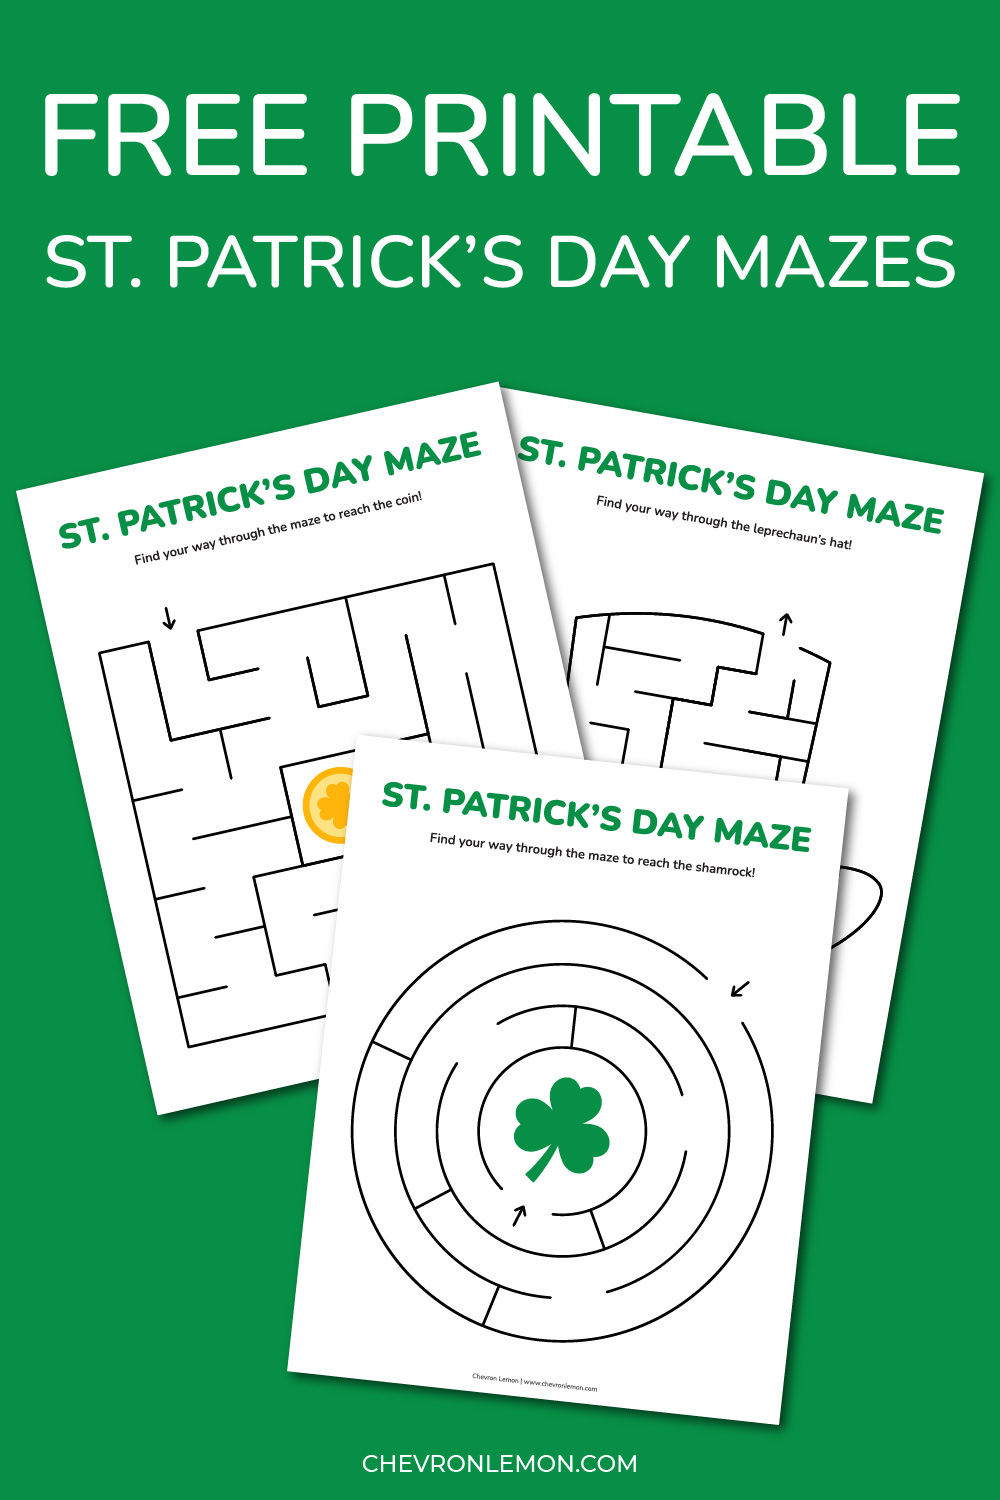 Simple St. Patrick's Day mazes